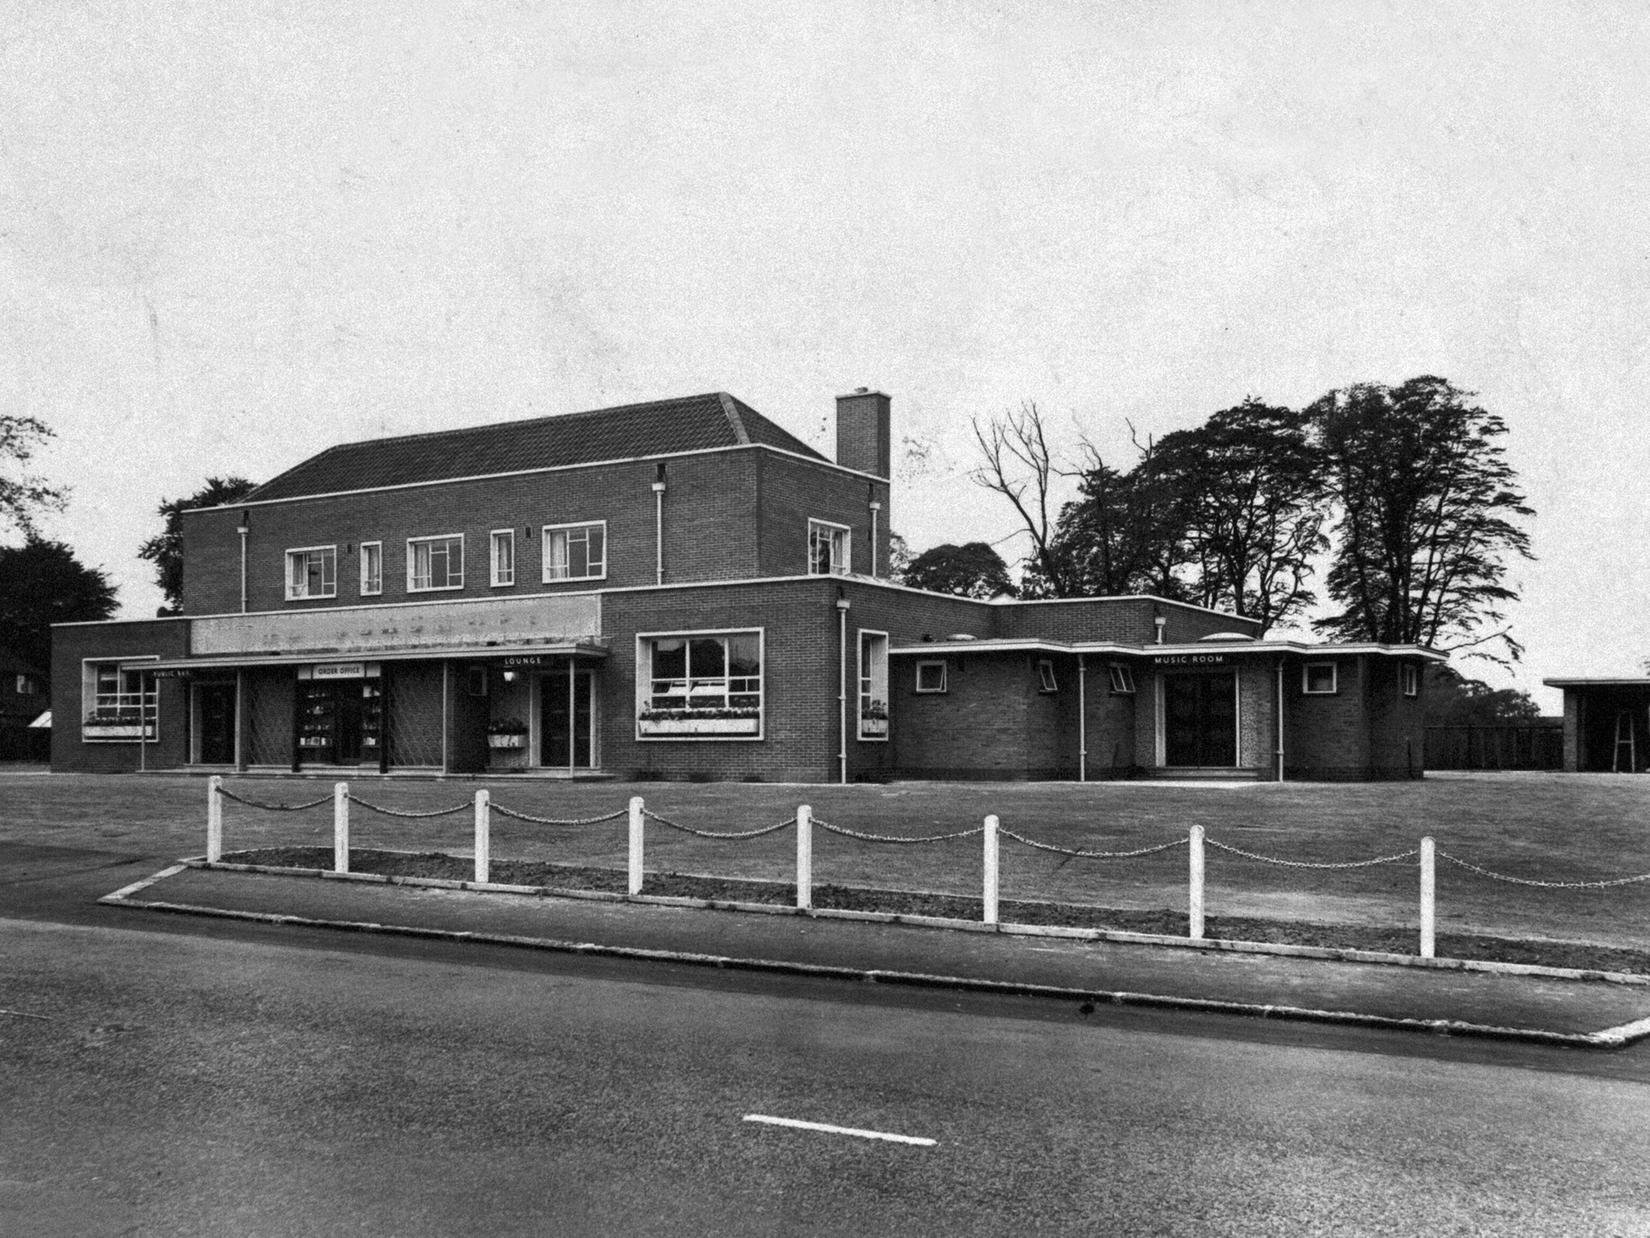 The Old Lion and Lamb public house in Seacroft.